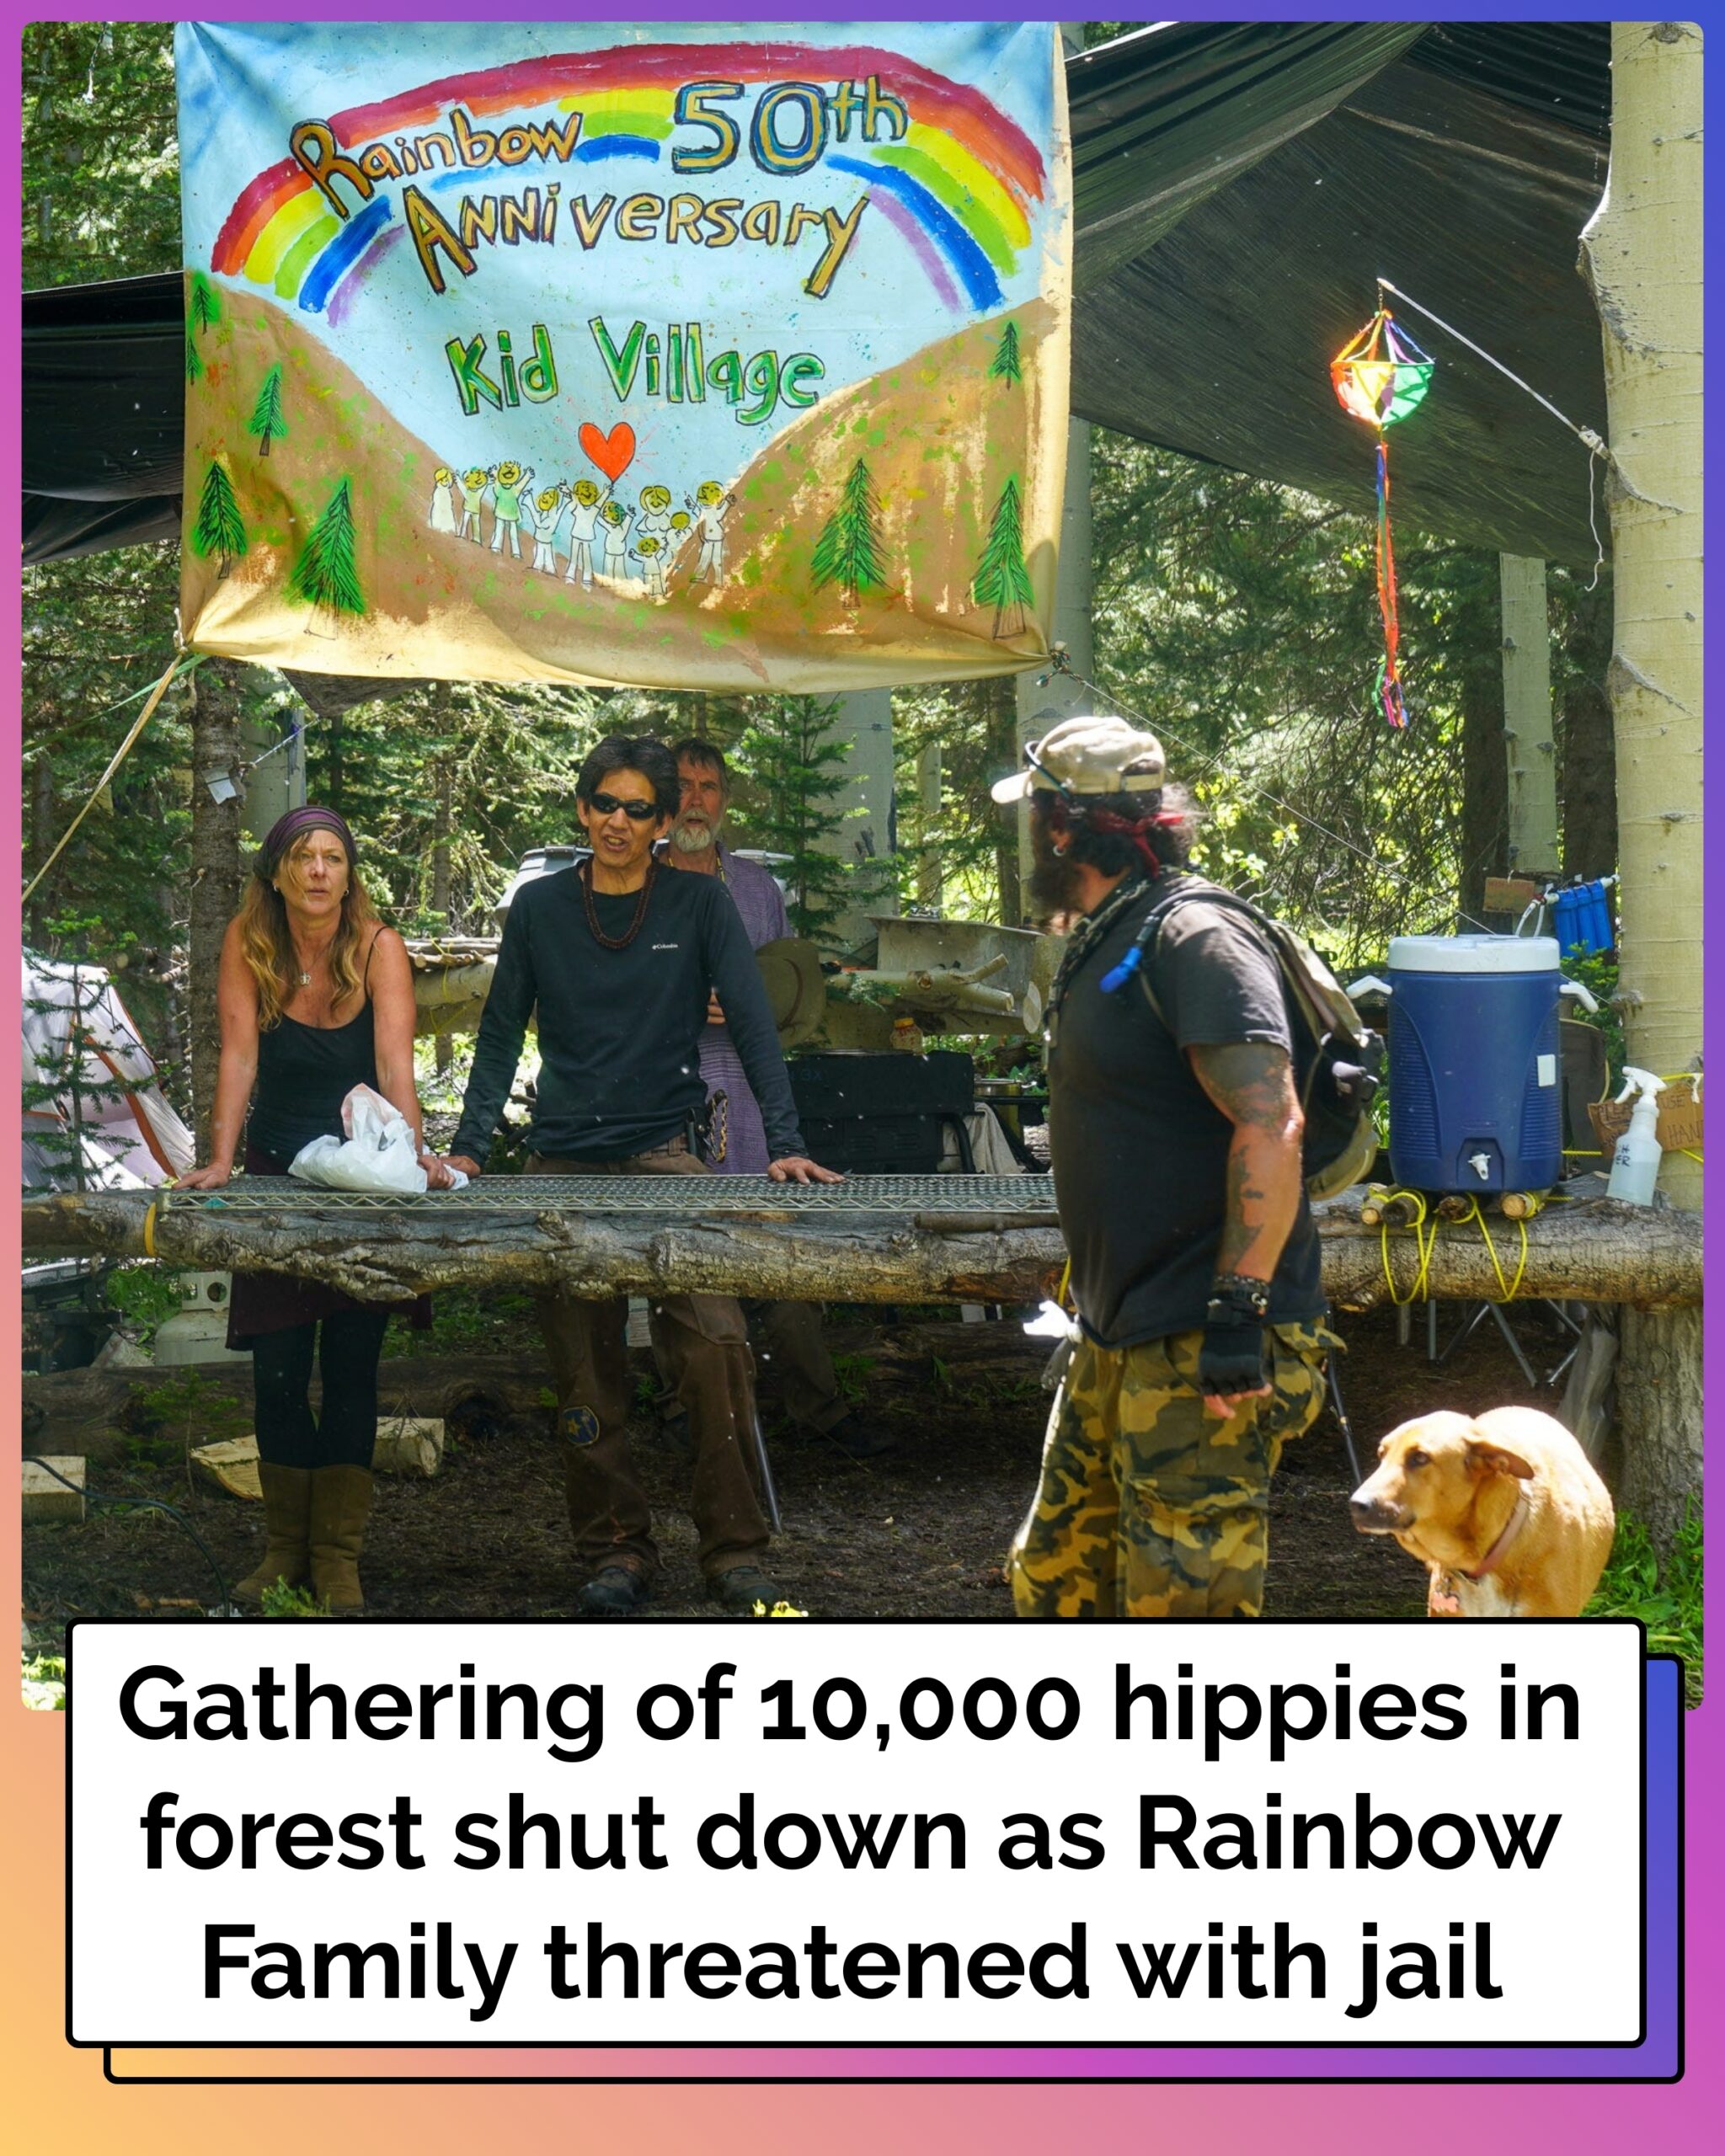 Gathering of 10,000 hippies in forest shut down as Rainbow Family threatened with jail